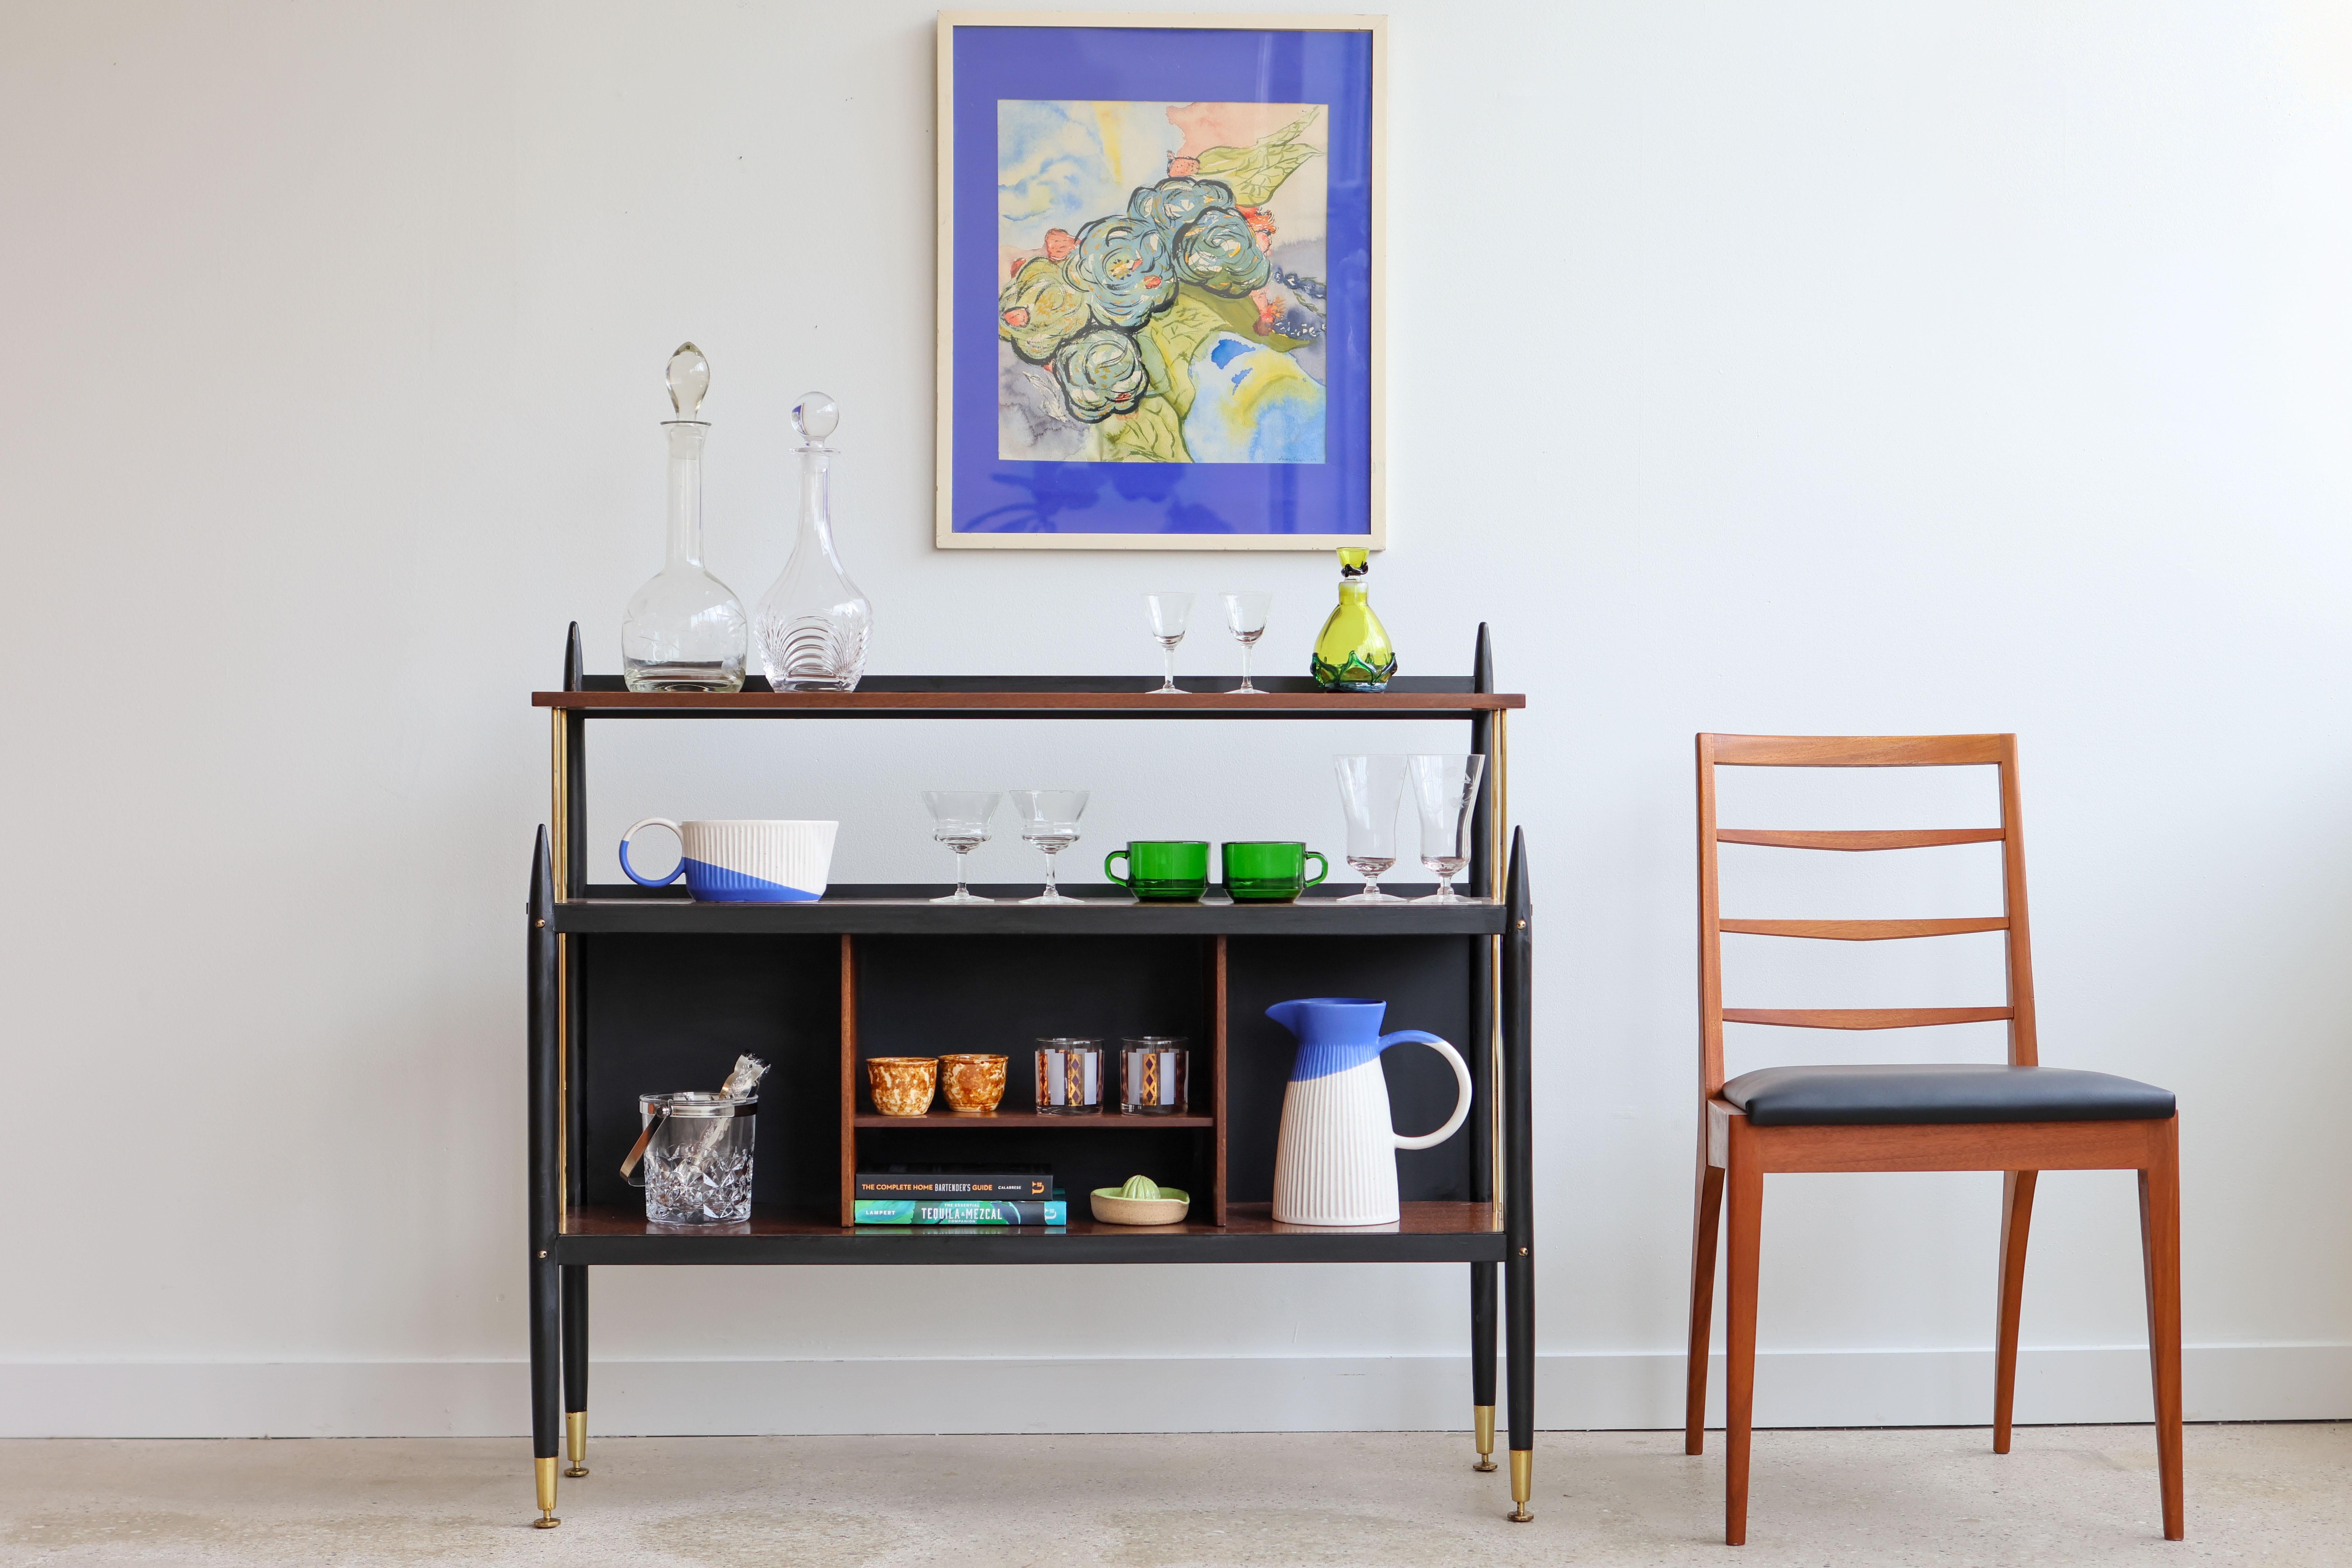 Mid-Century Modern tola bar display shelf unit.
From the 'Librenza' collection by G-Plan, UK, 1960s.
Tola wood (an African Mahogany) paired with ebonized wood and brass, inspired by late 1950s Italian glamour. 
Great as a serving bar or